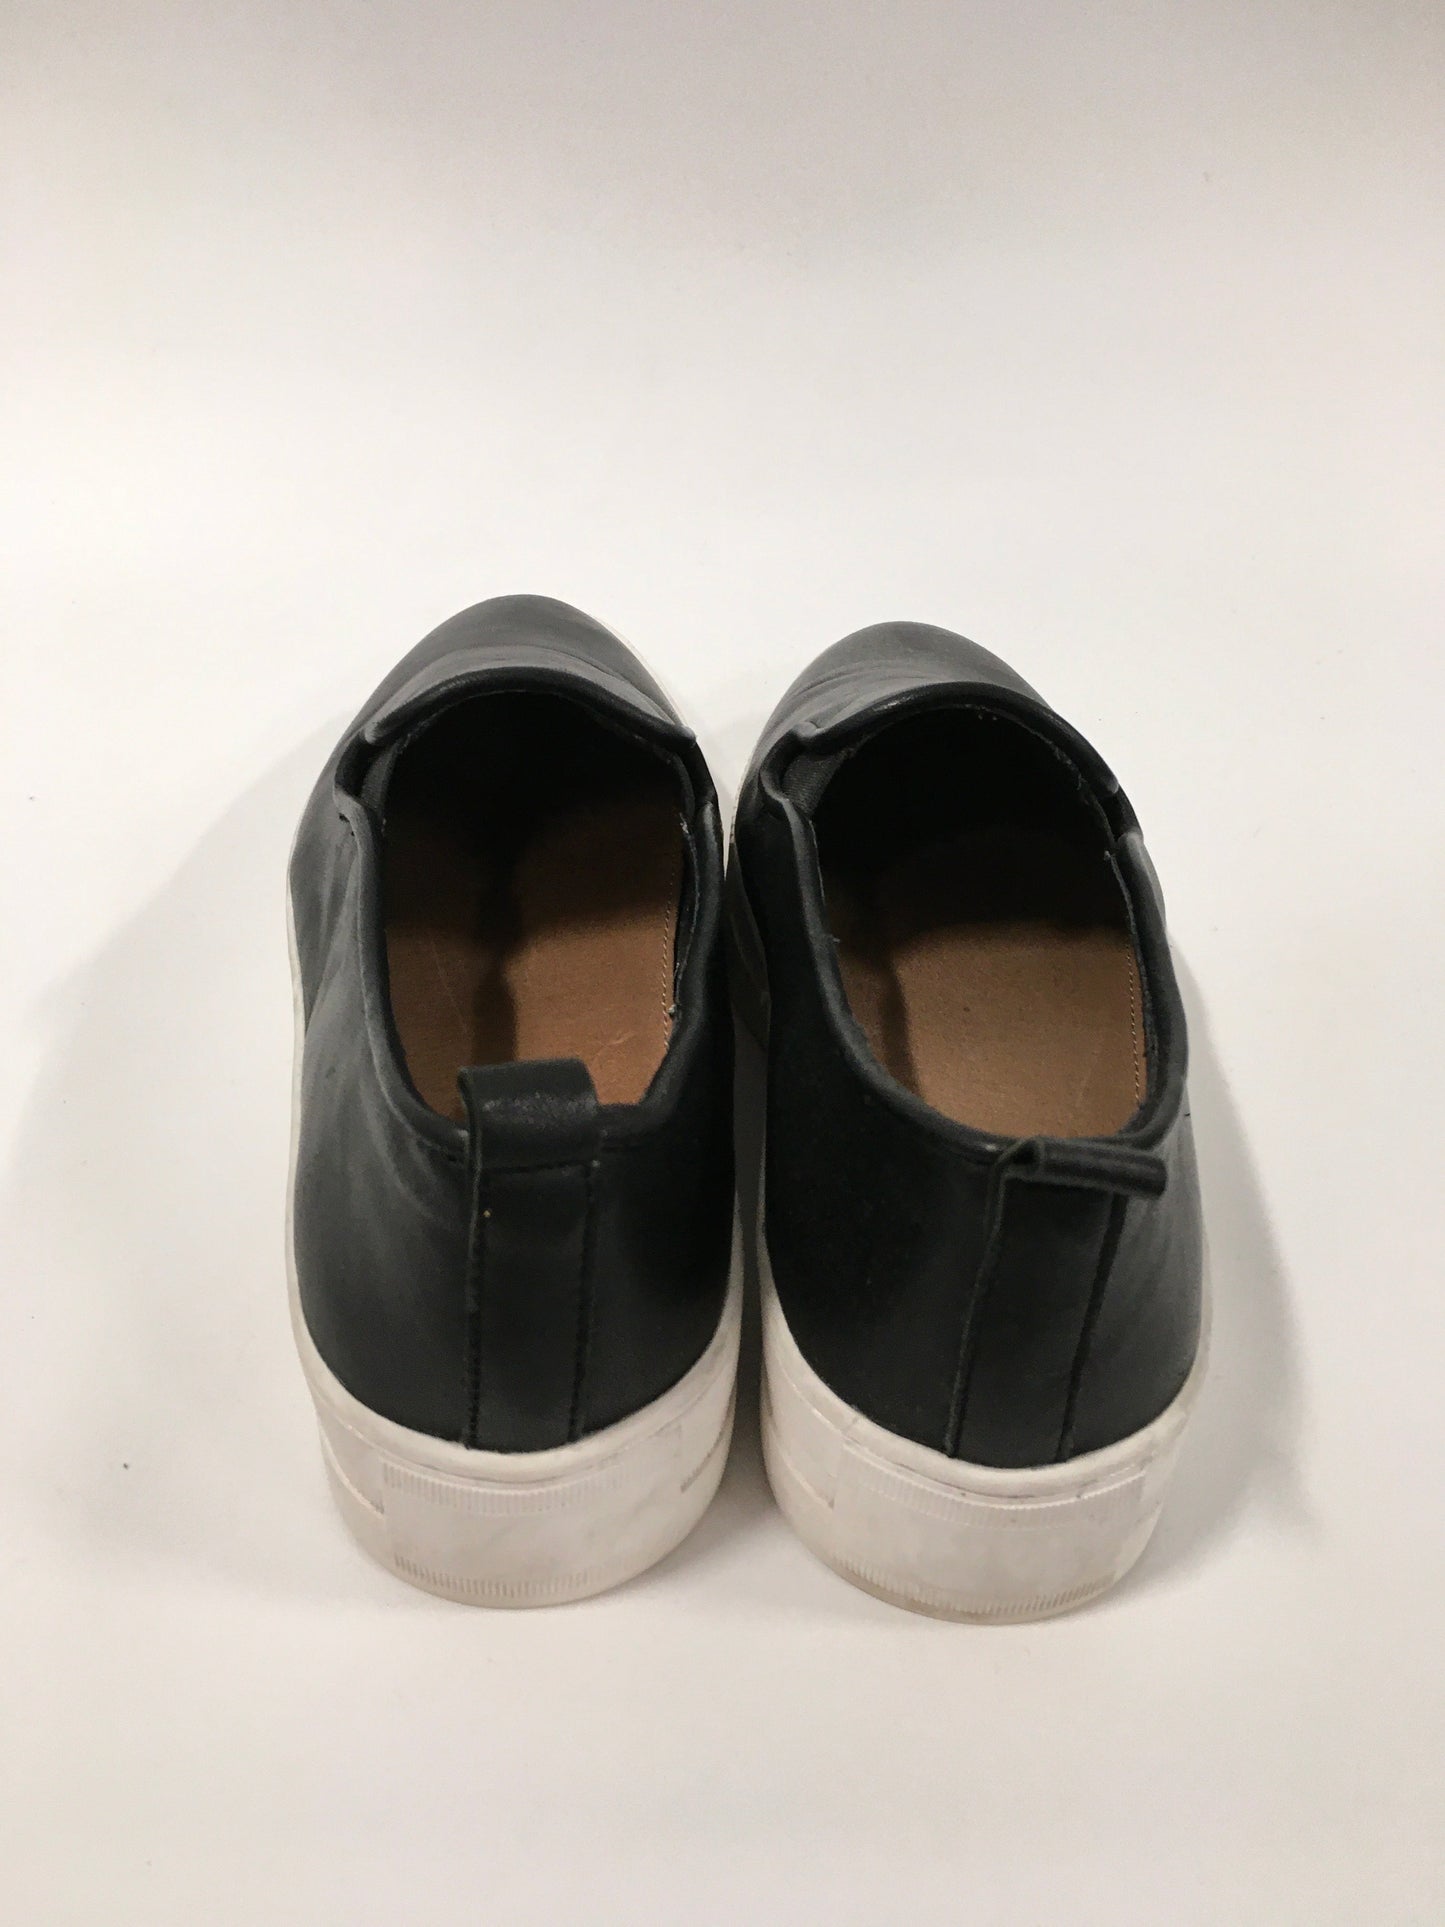 Leather Shoes Flats Other Halogen, Size 6